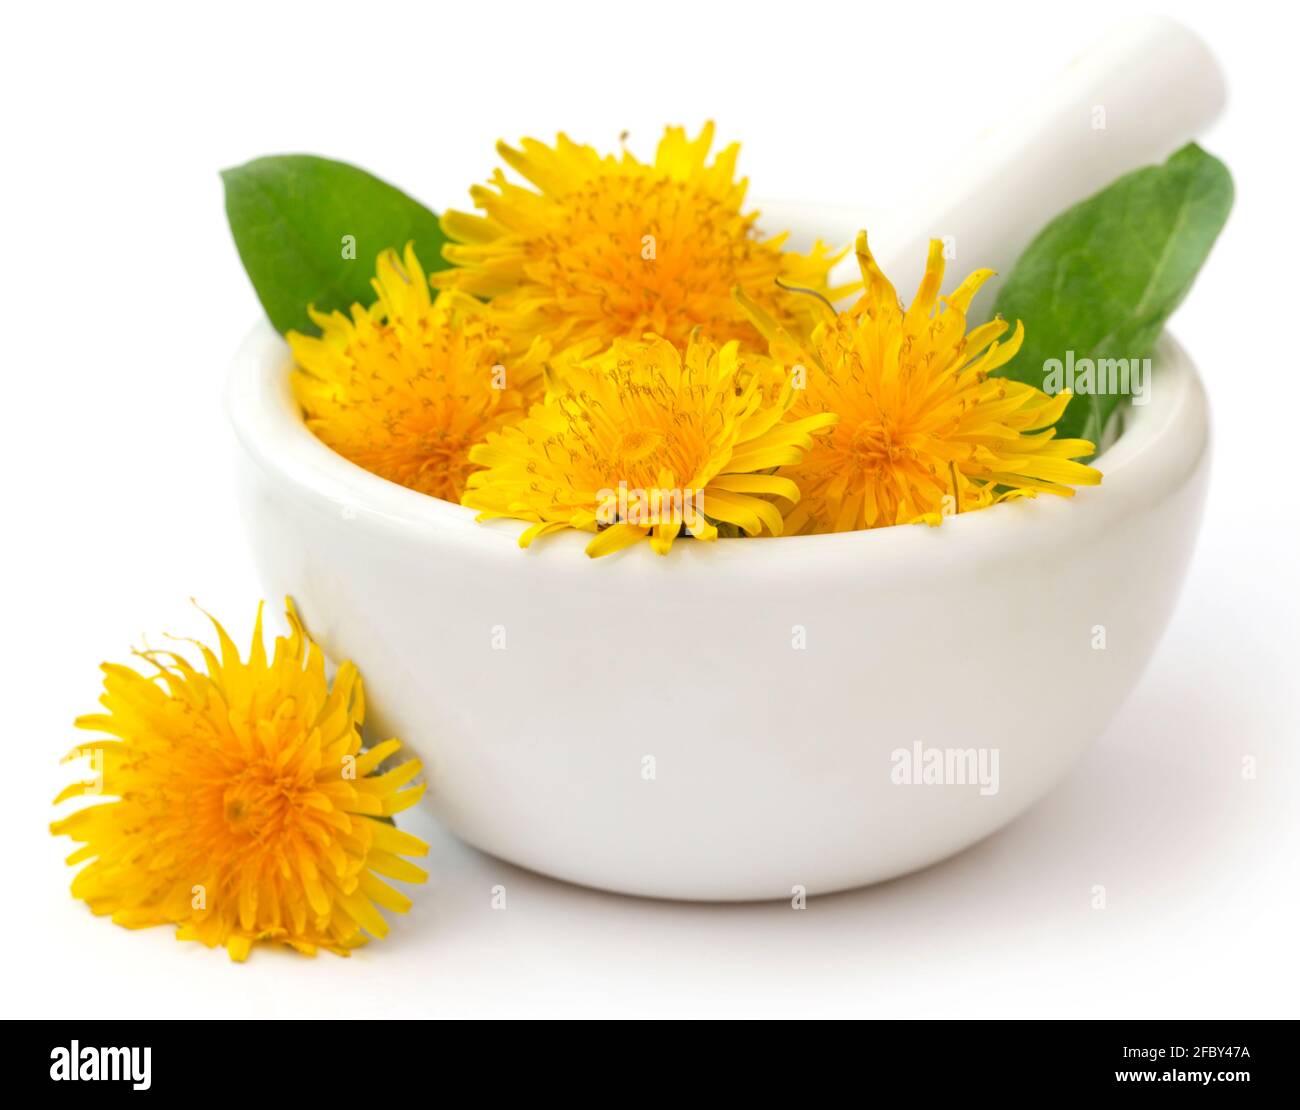 Medicinal dandelion with mortar and pestle over white background Stock Photo